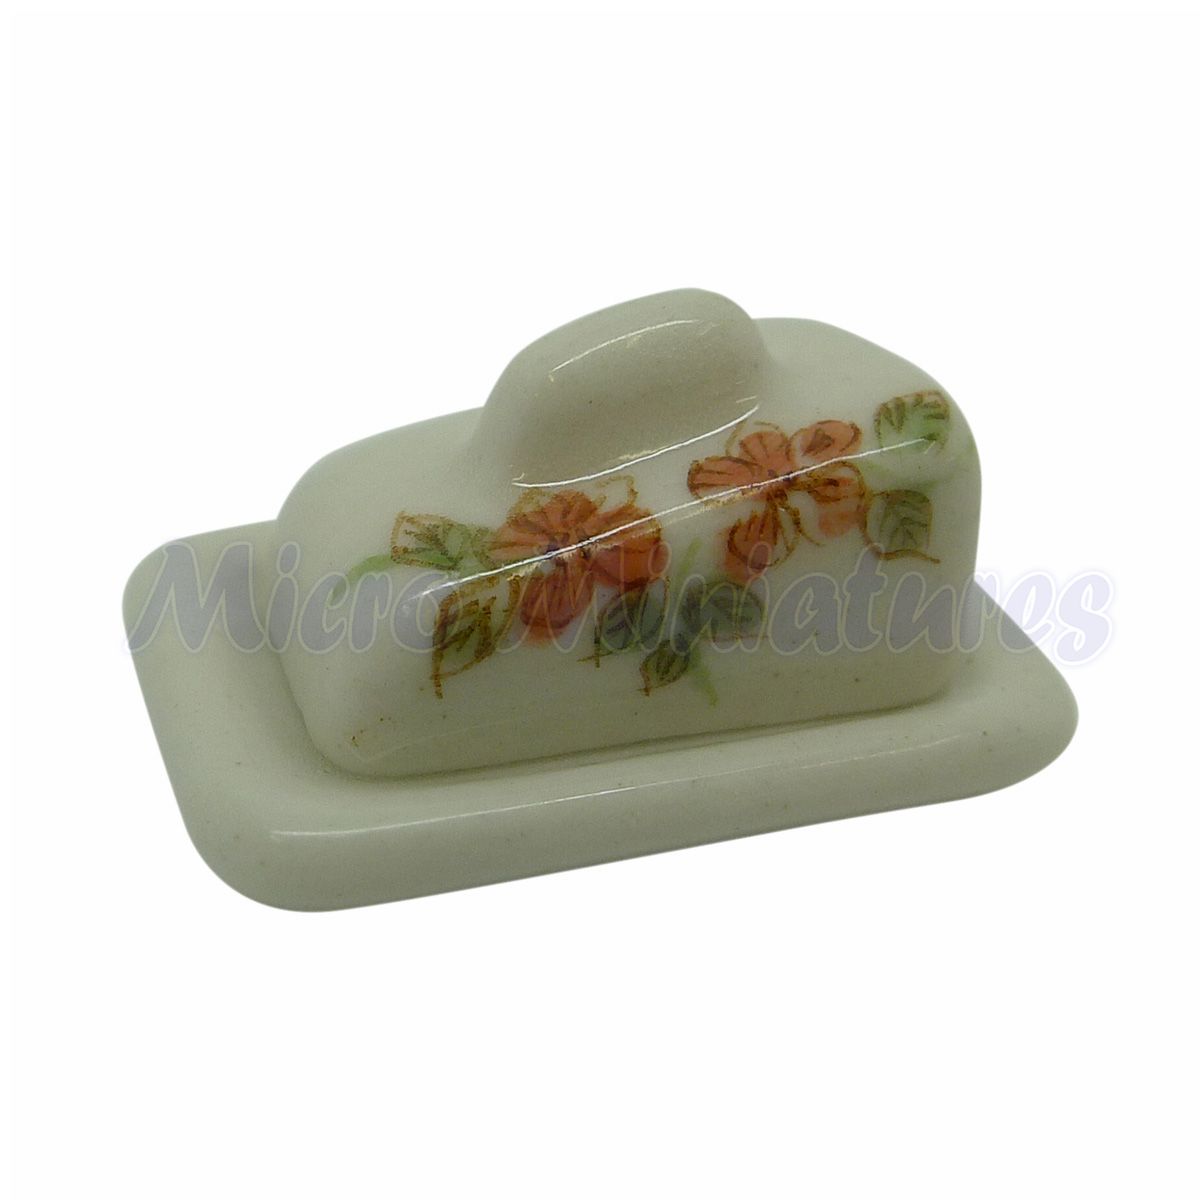 Dolls House Floral Cheese Dish 1/12th Scale 01650 